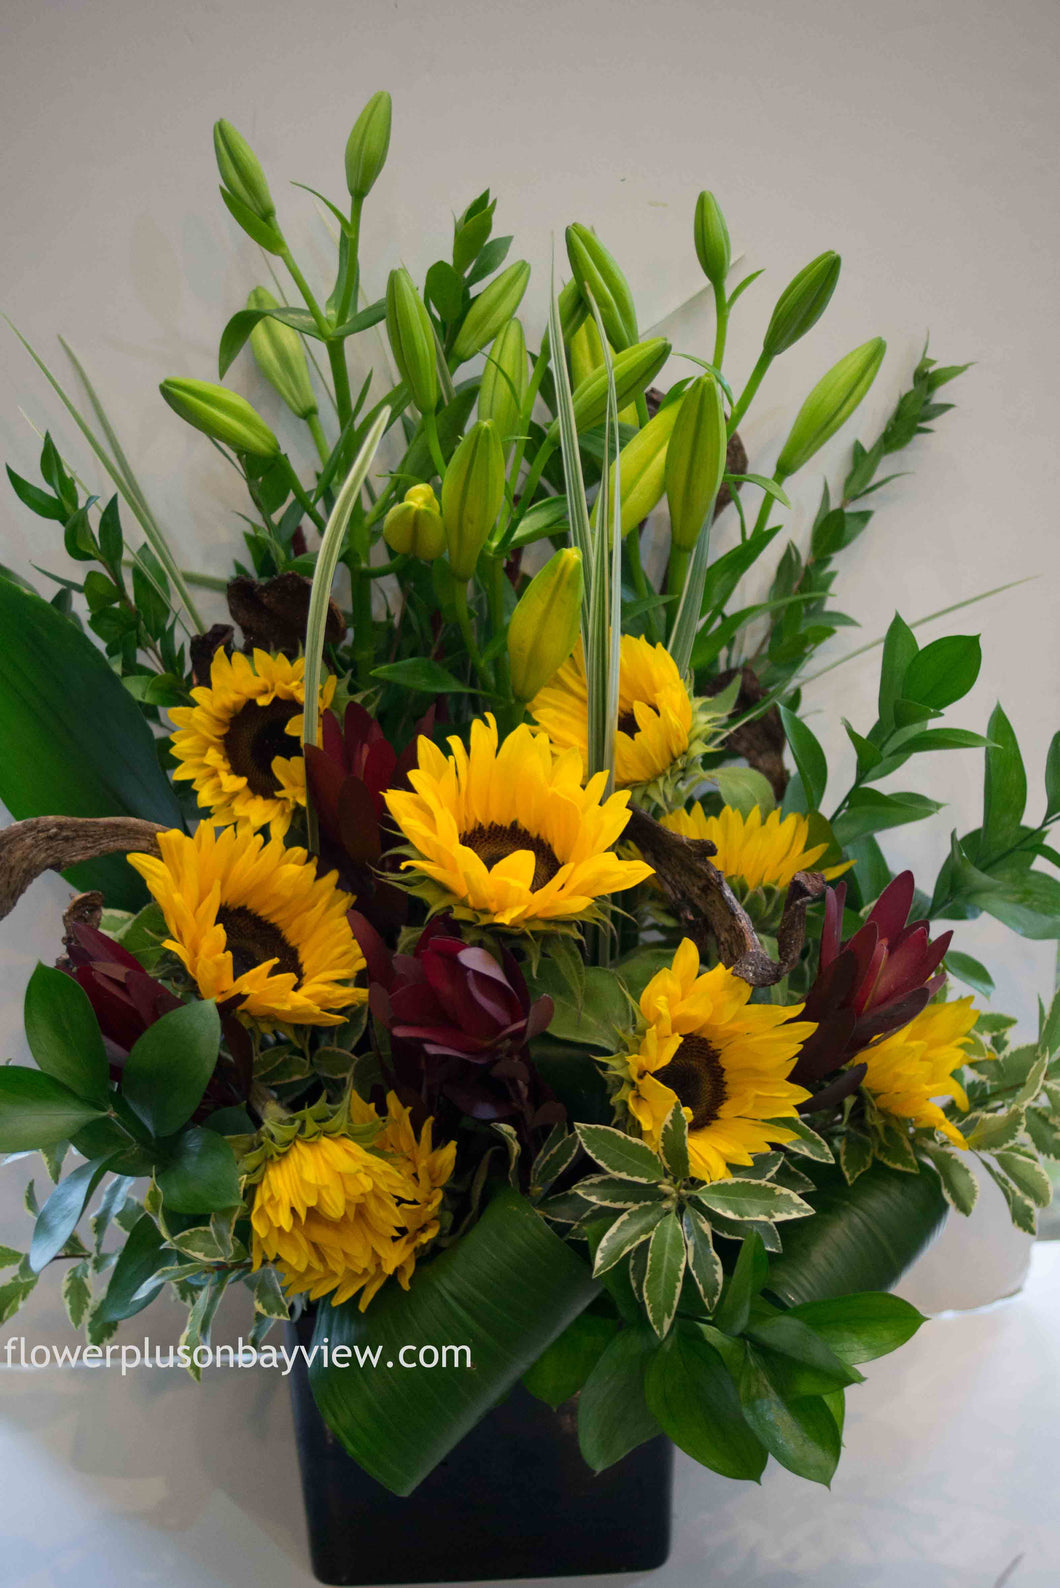 C36 - Vivid Sunflowers accented with Lilies - Flowerplustoronto